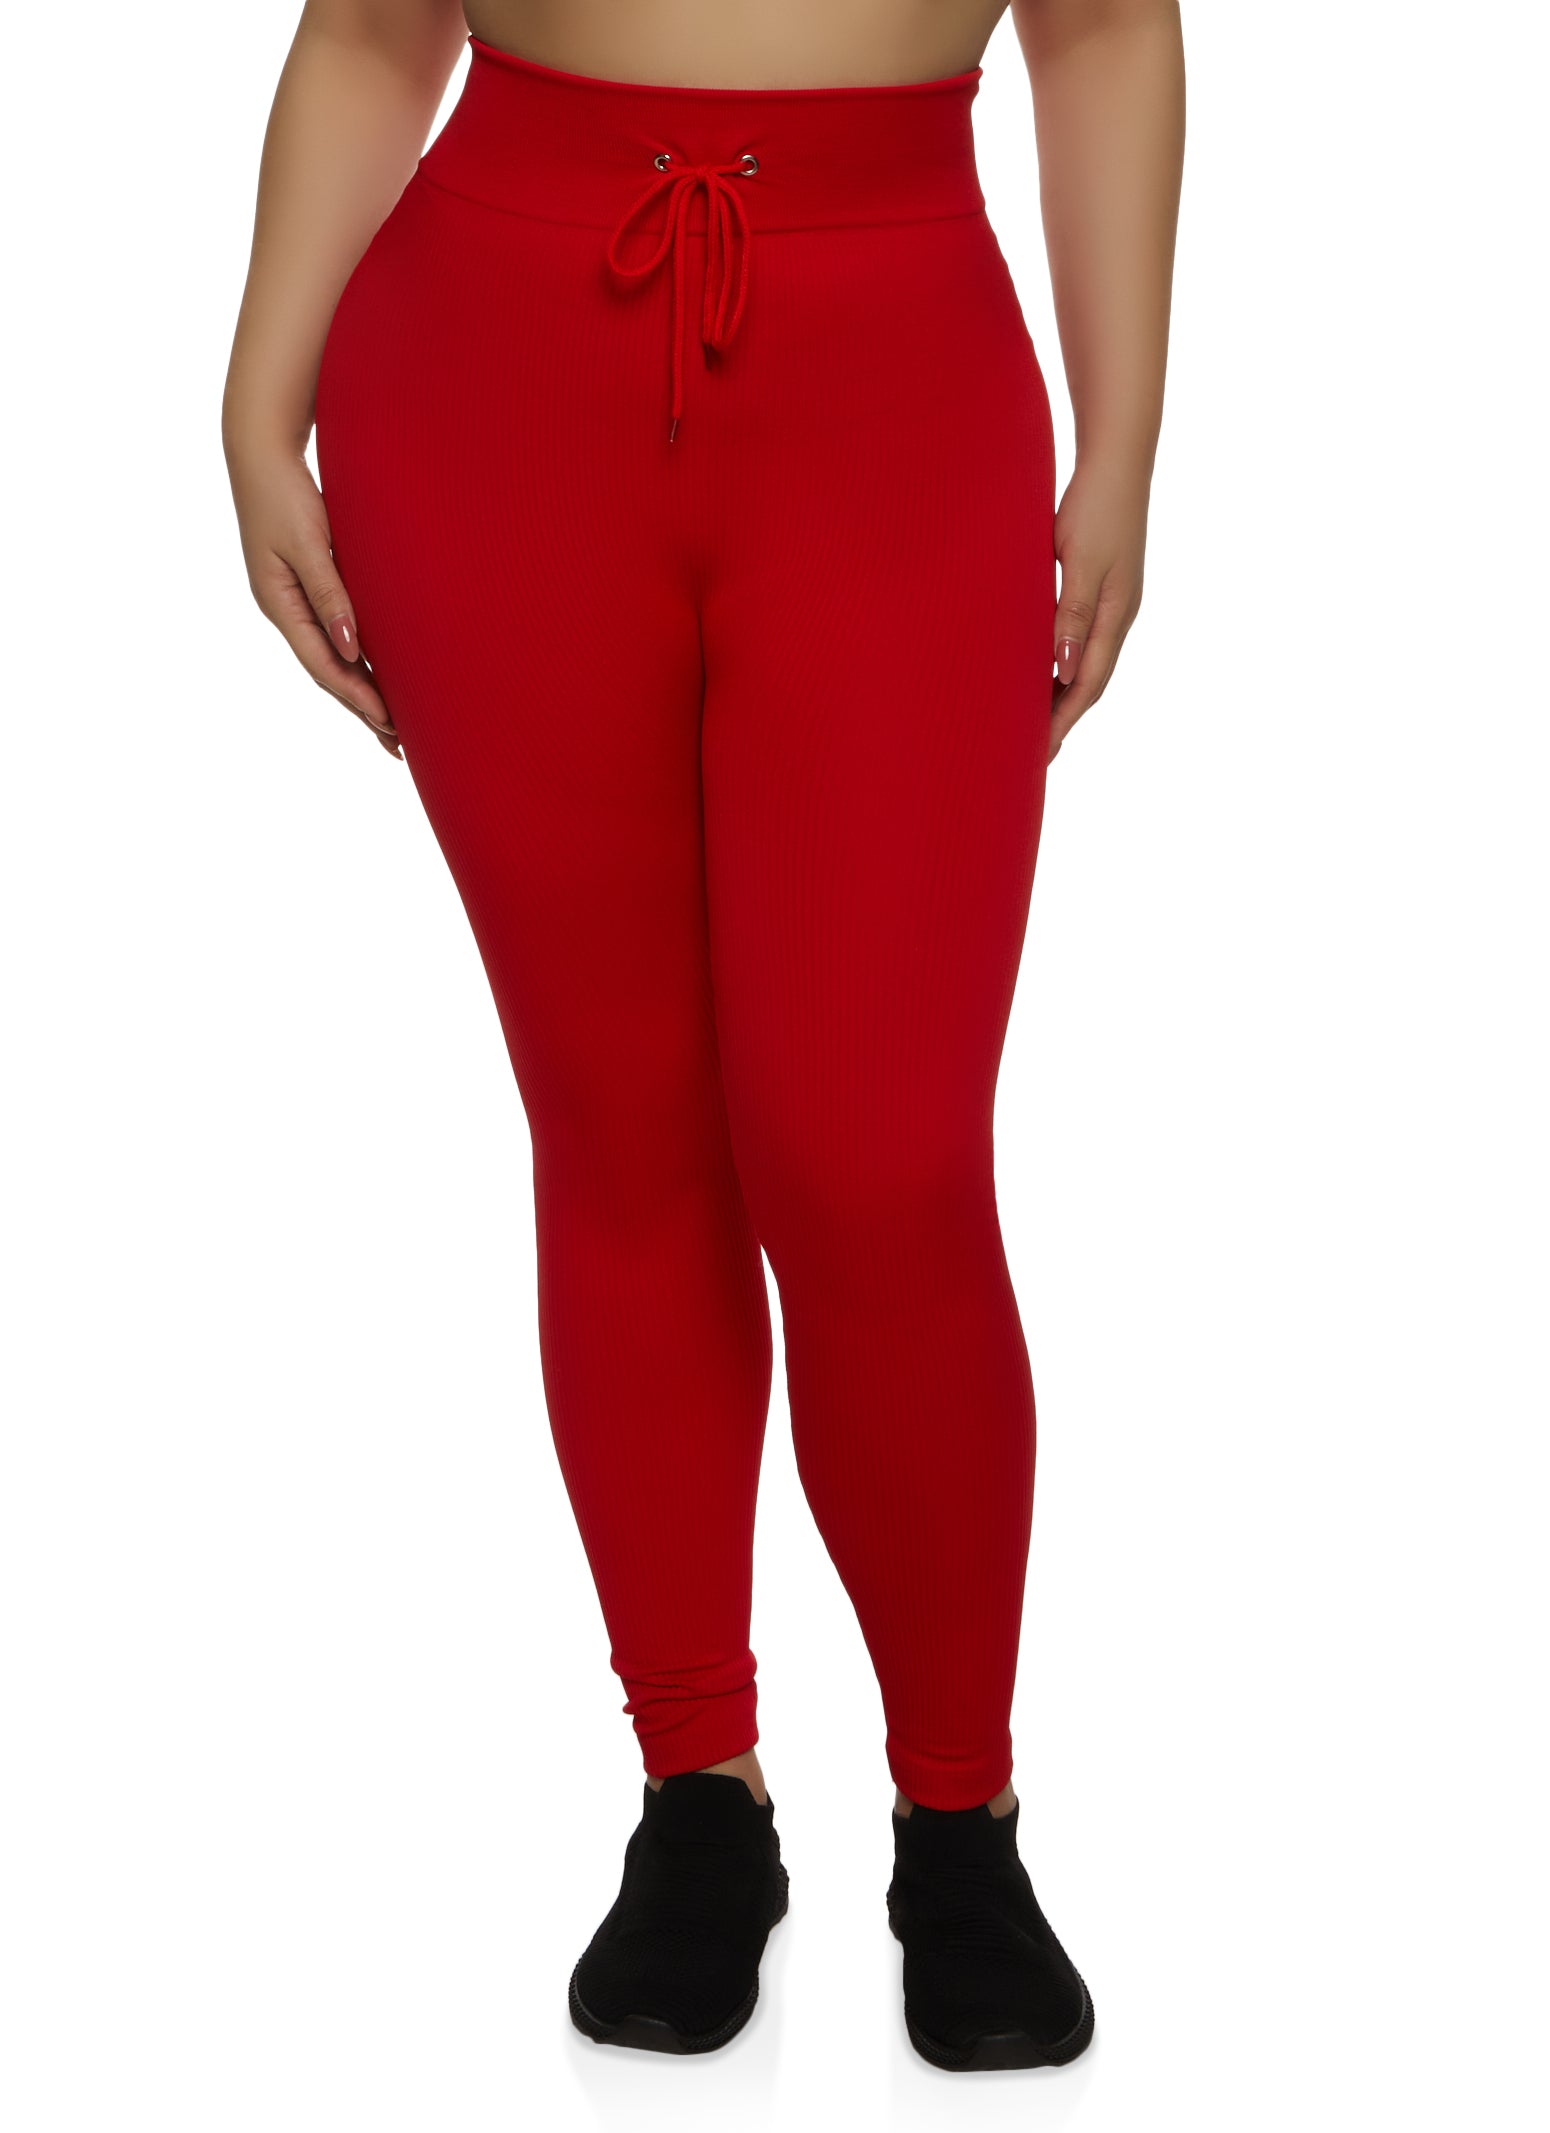 Womens Plus Size Seamless Fleece Lined Leggings Fits Size 2X 3X 4X Red